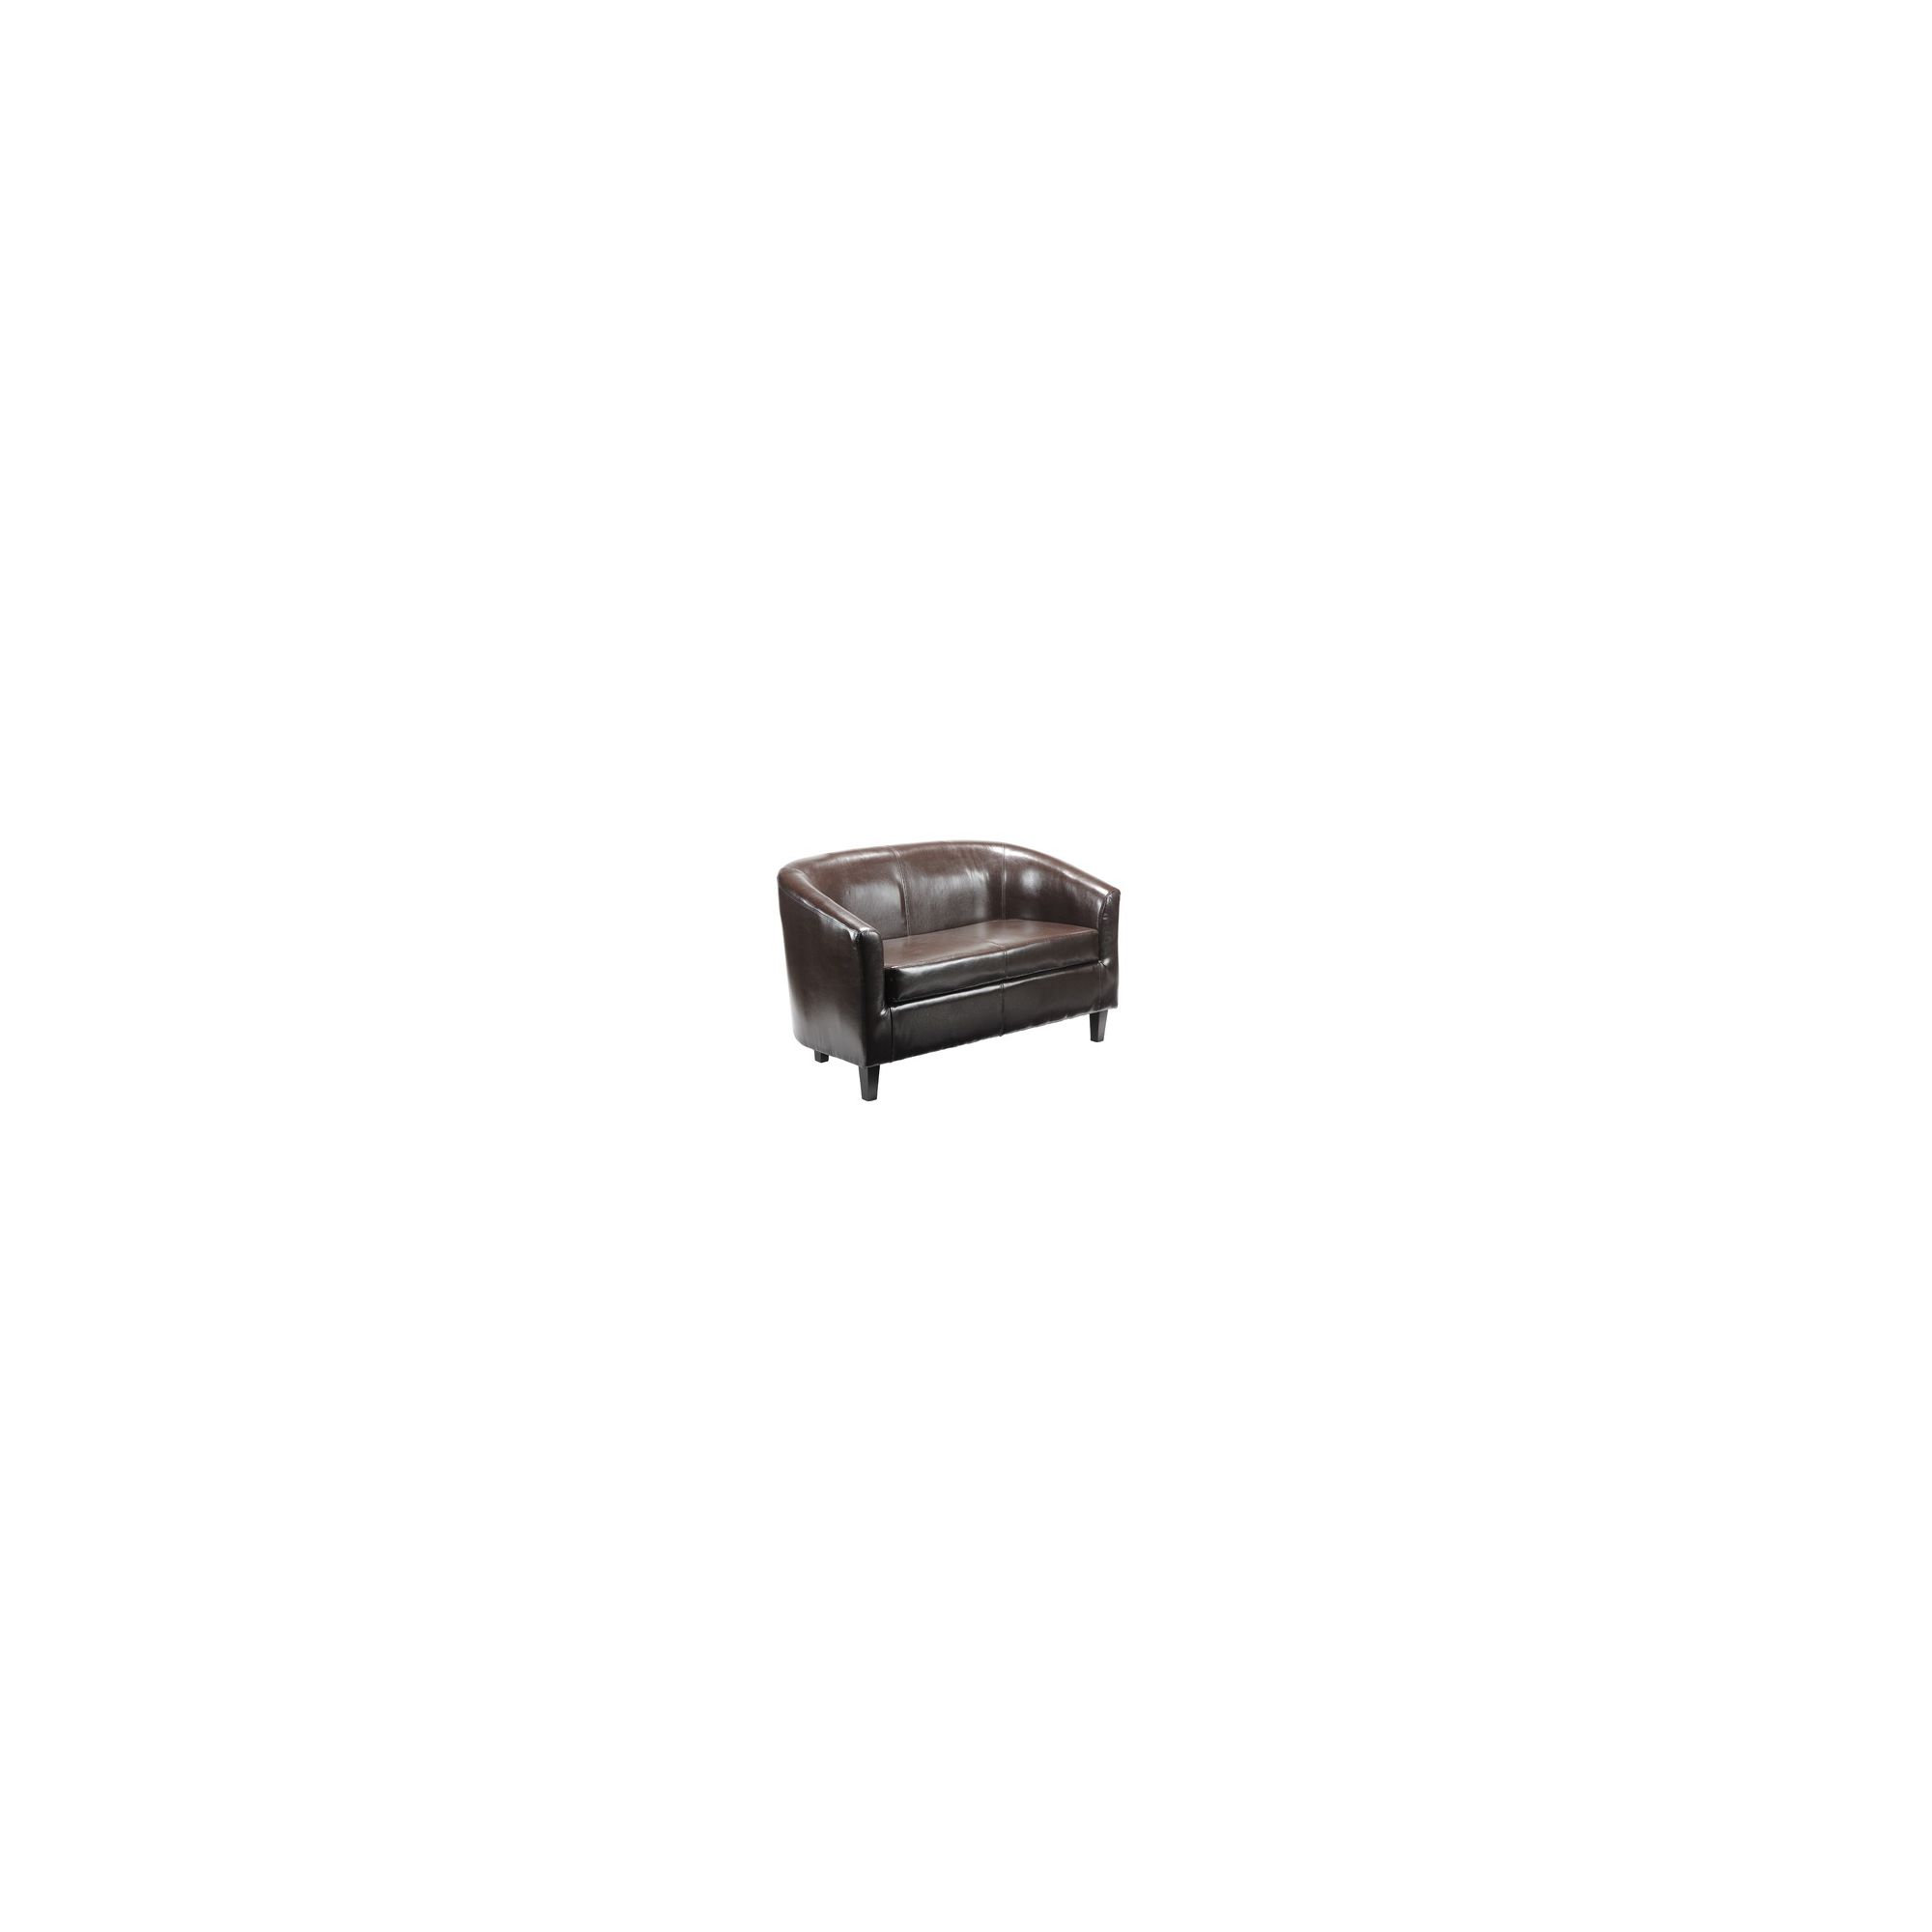 Tasha Creations Bonded Leather Two Seater Sofa in Brown at Tesco Direct